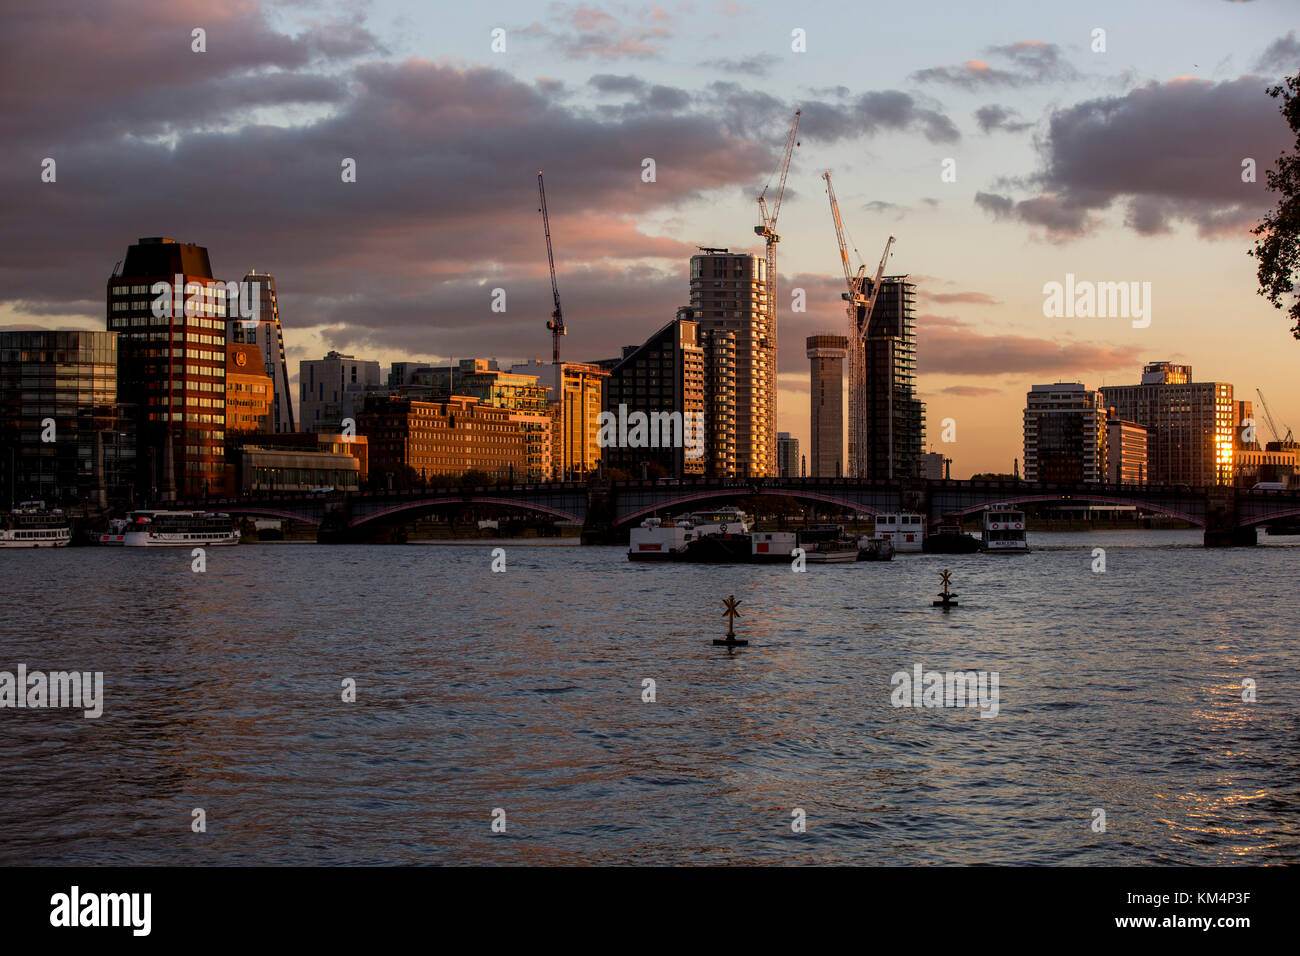 View of the London skyline on the south bank of the River Thames with buildings lit by the setting sun, bridges and the dark river. Stock Photo